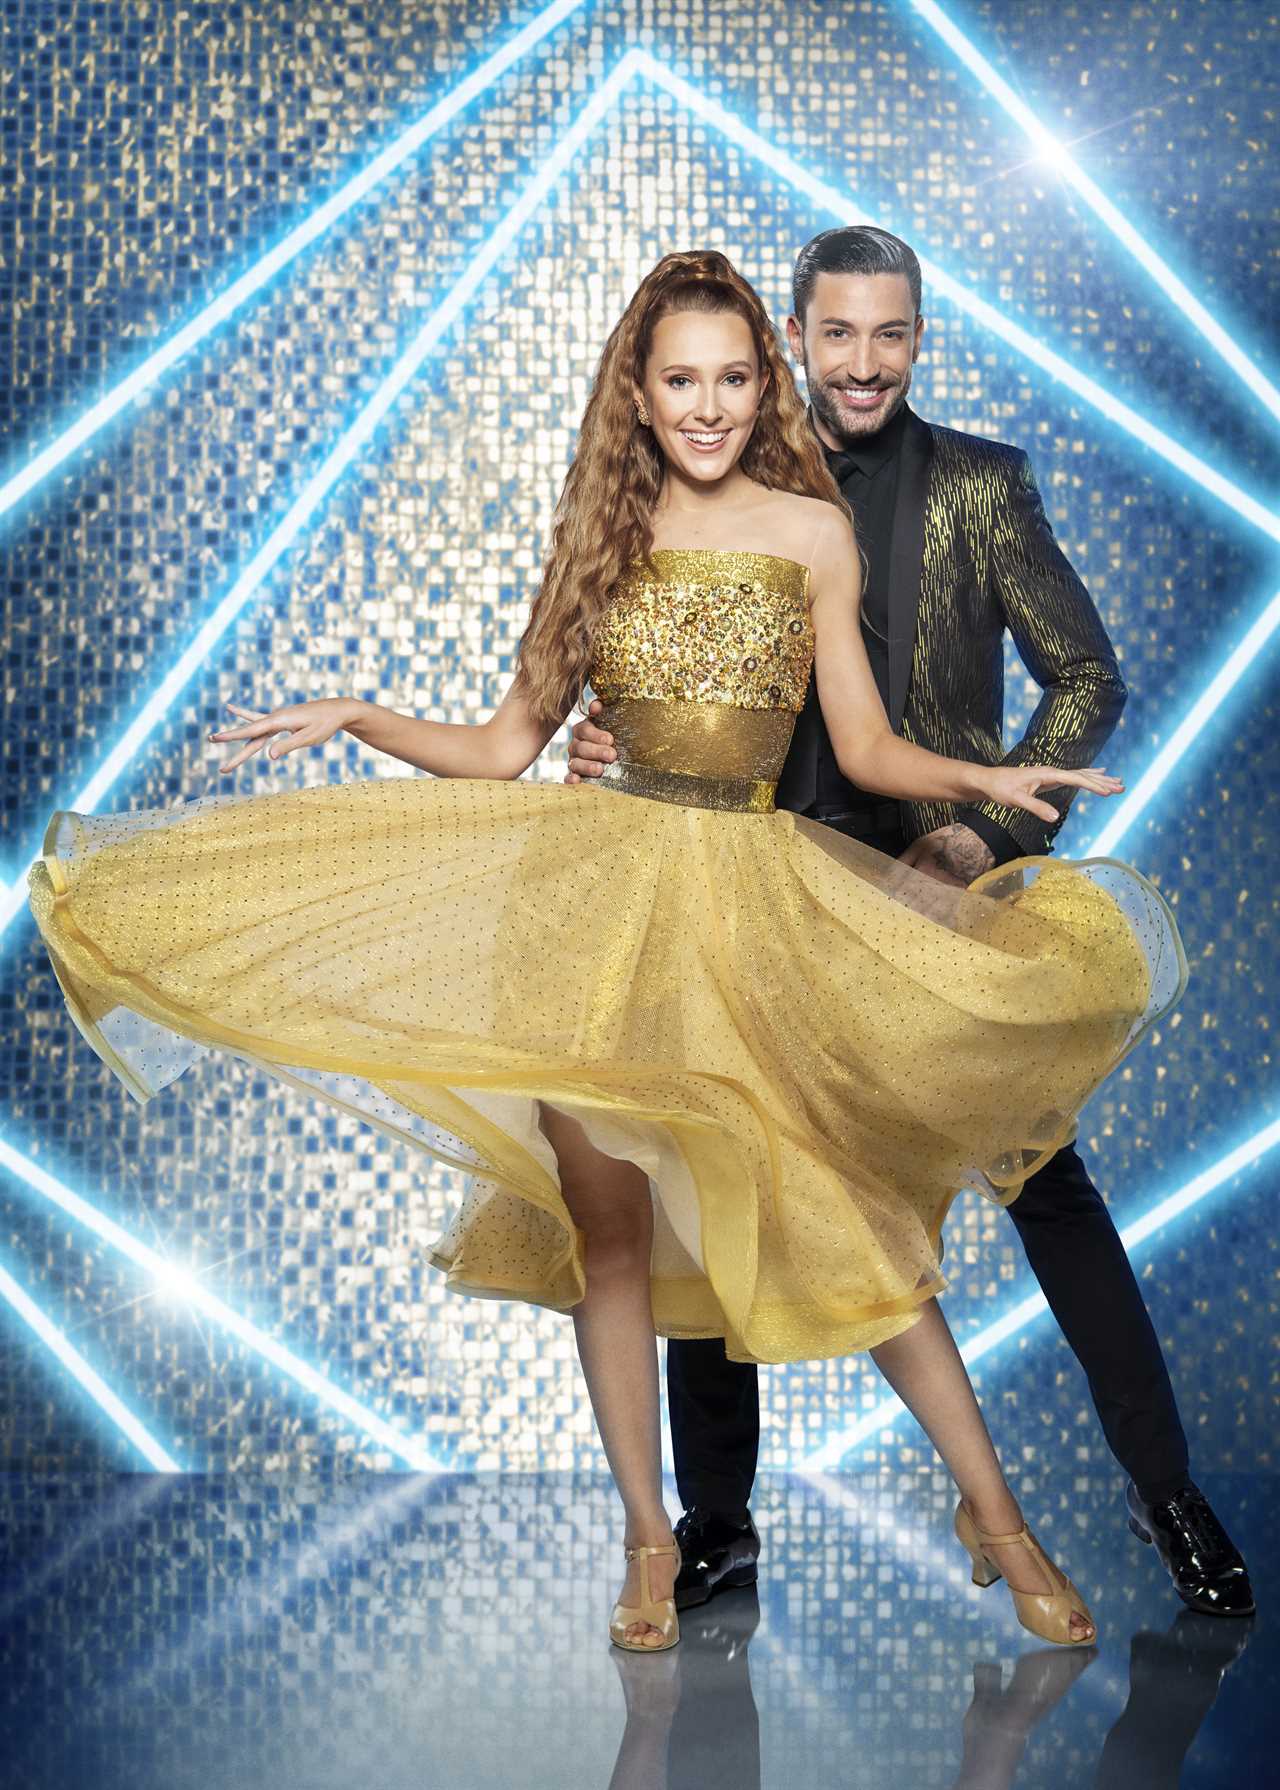 How Strictly winners have cashed in with lingerie deals, Britain’s Got Talent job and bizarre new career